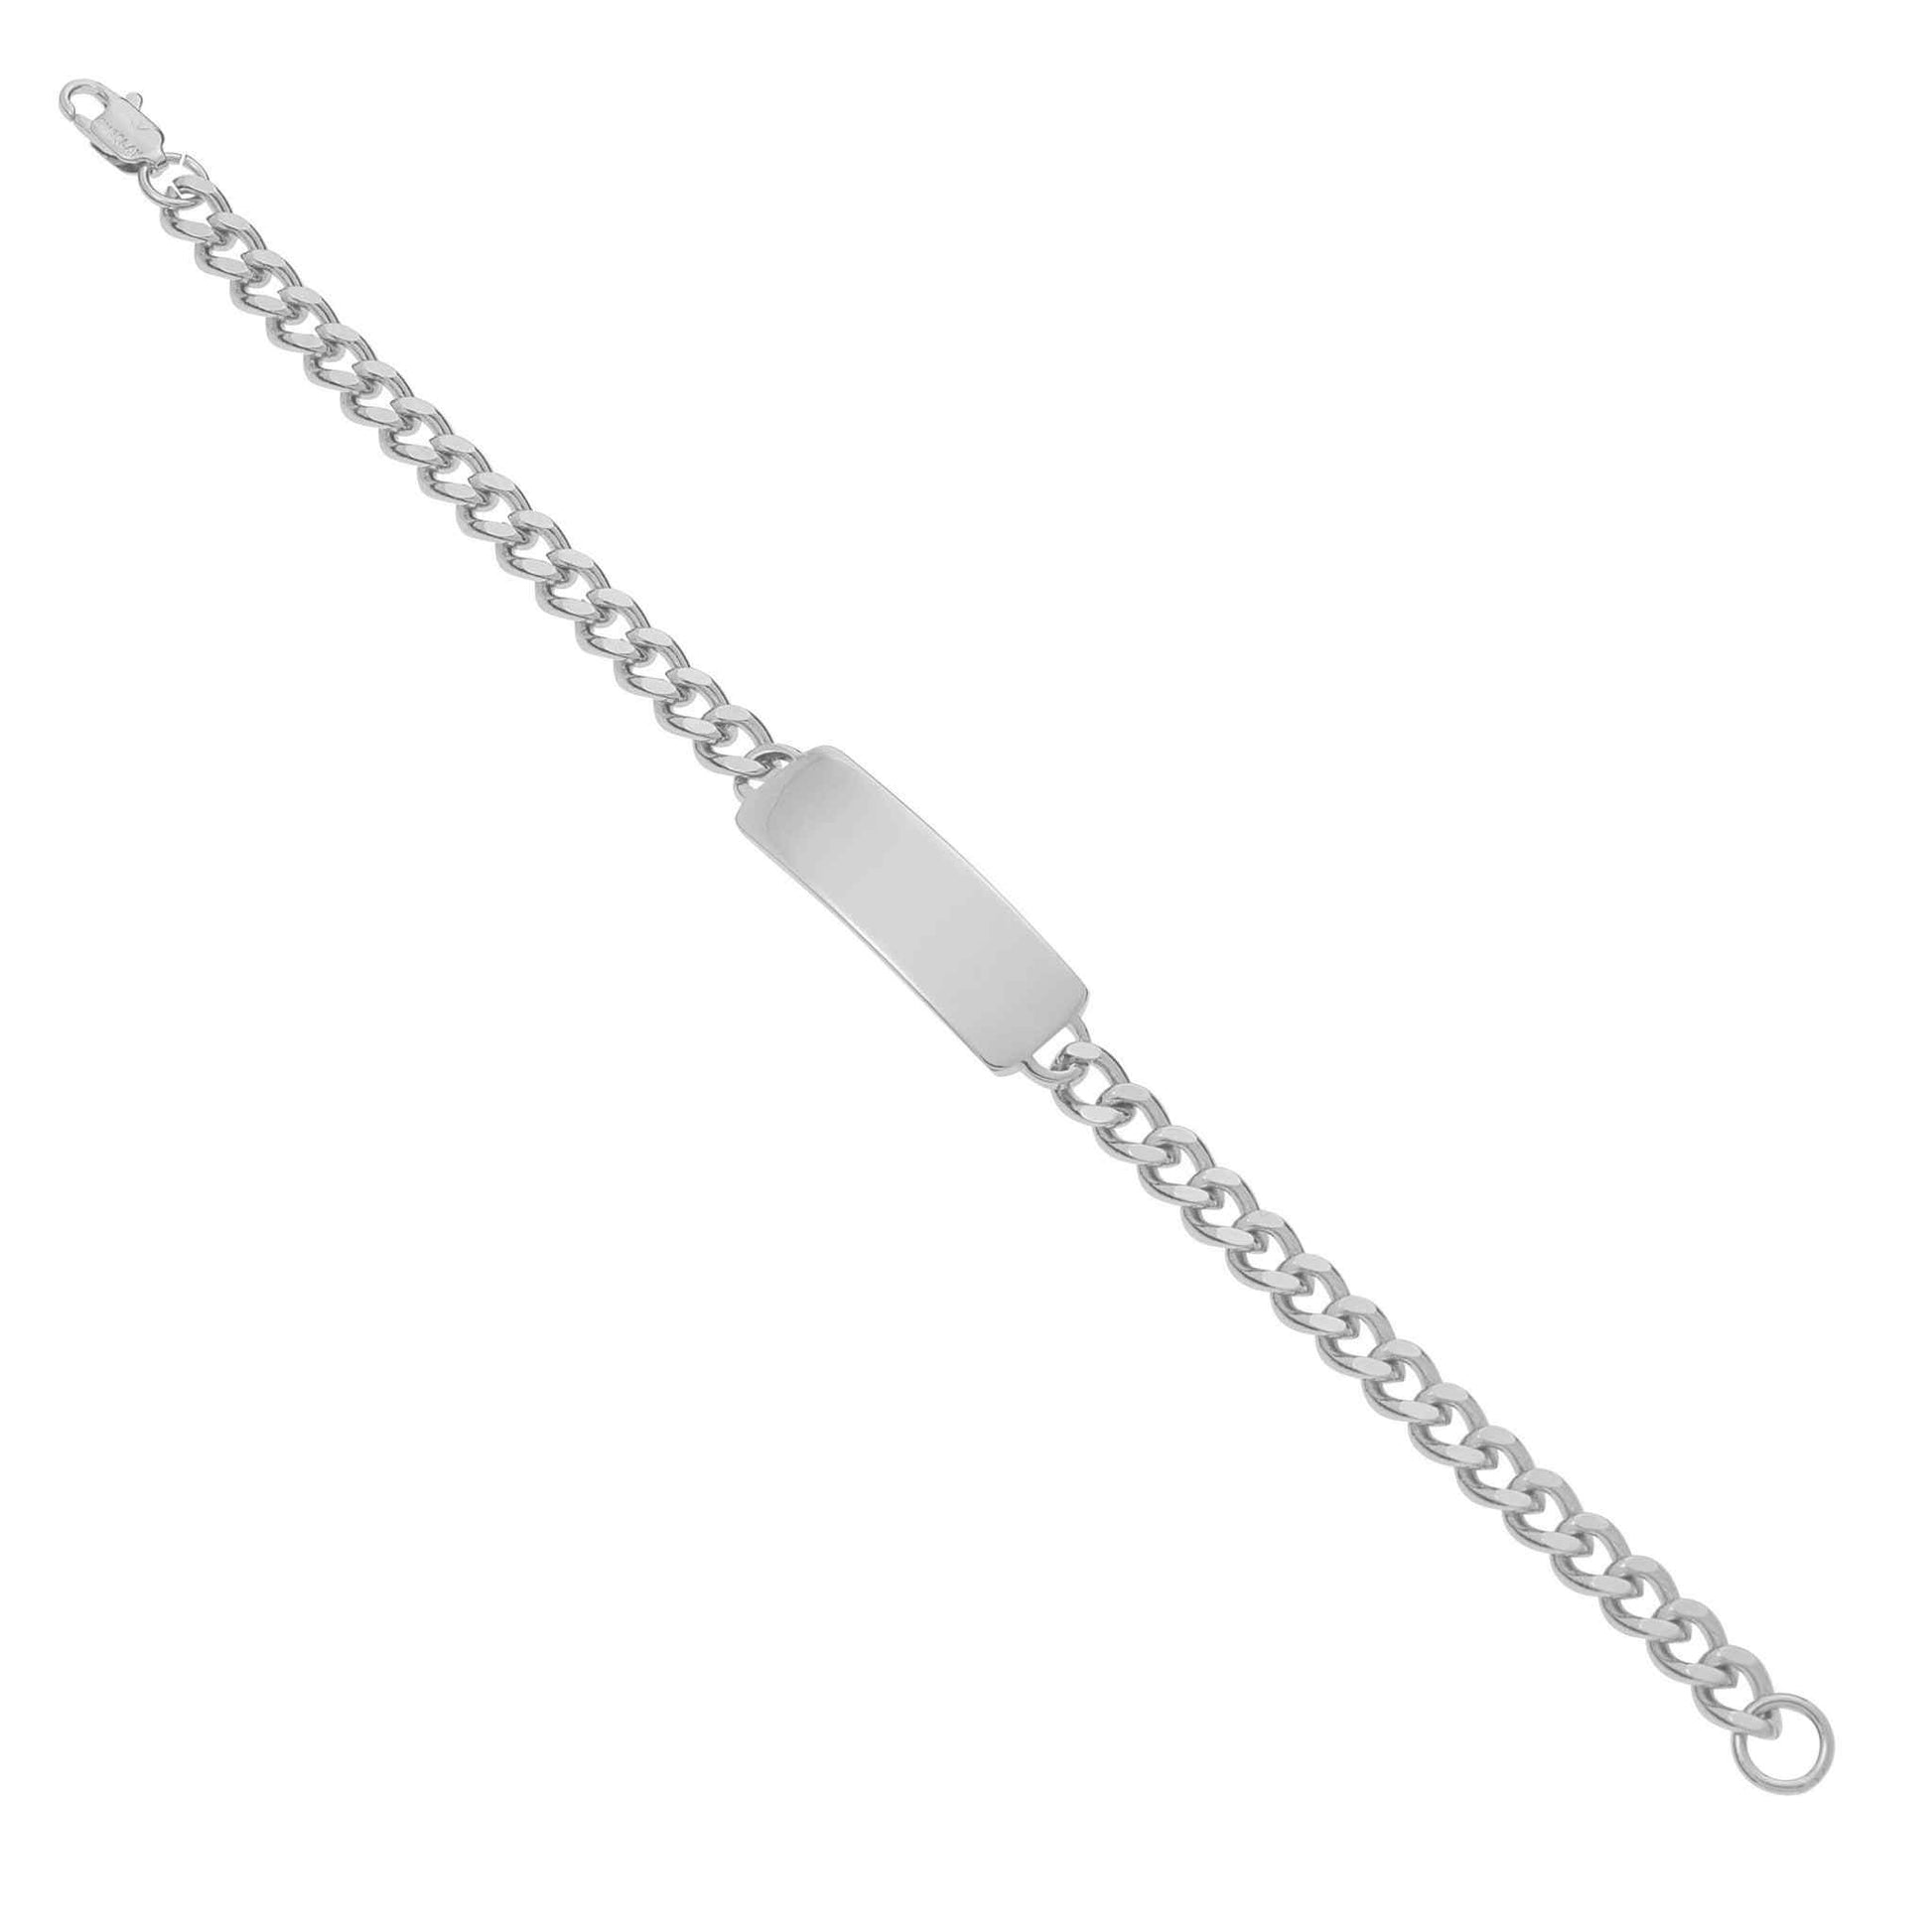 A engraveable id bracelet displayed on a neutral white background.